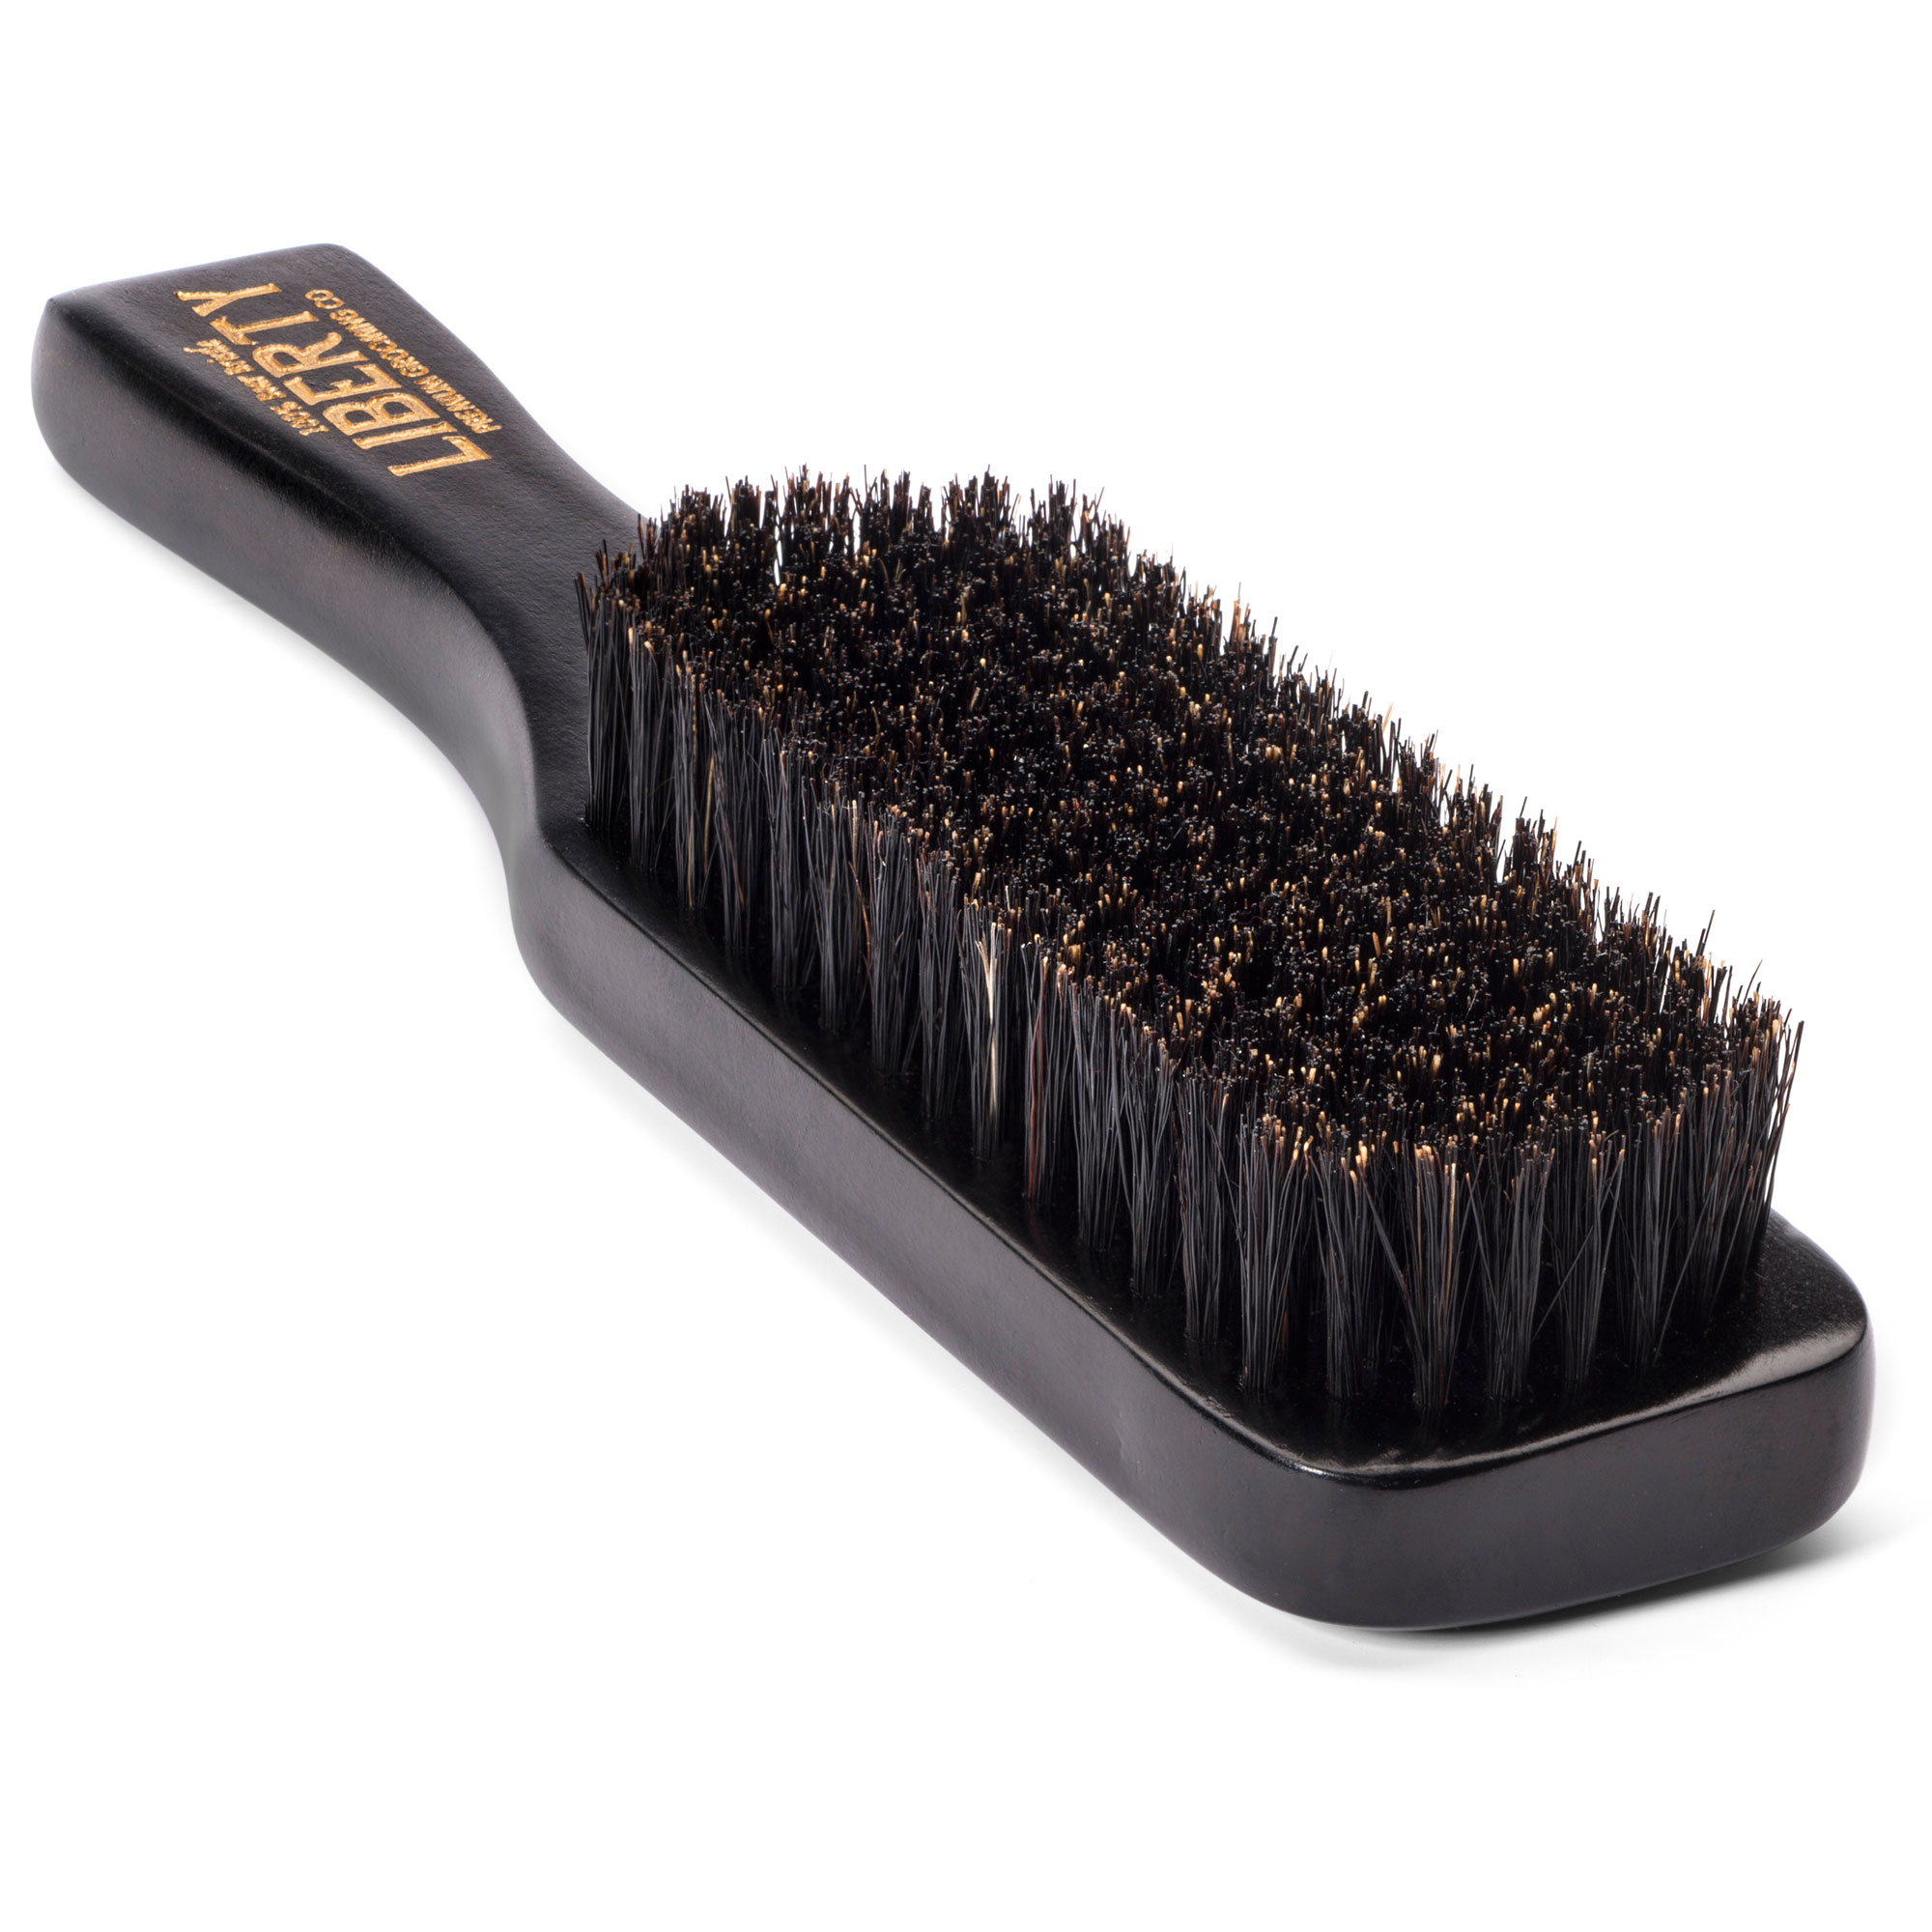 Best African American Beard Brush To Use